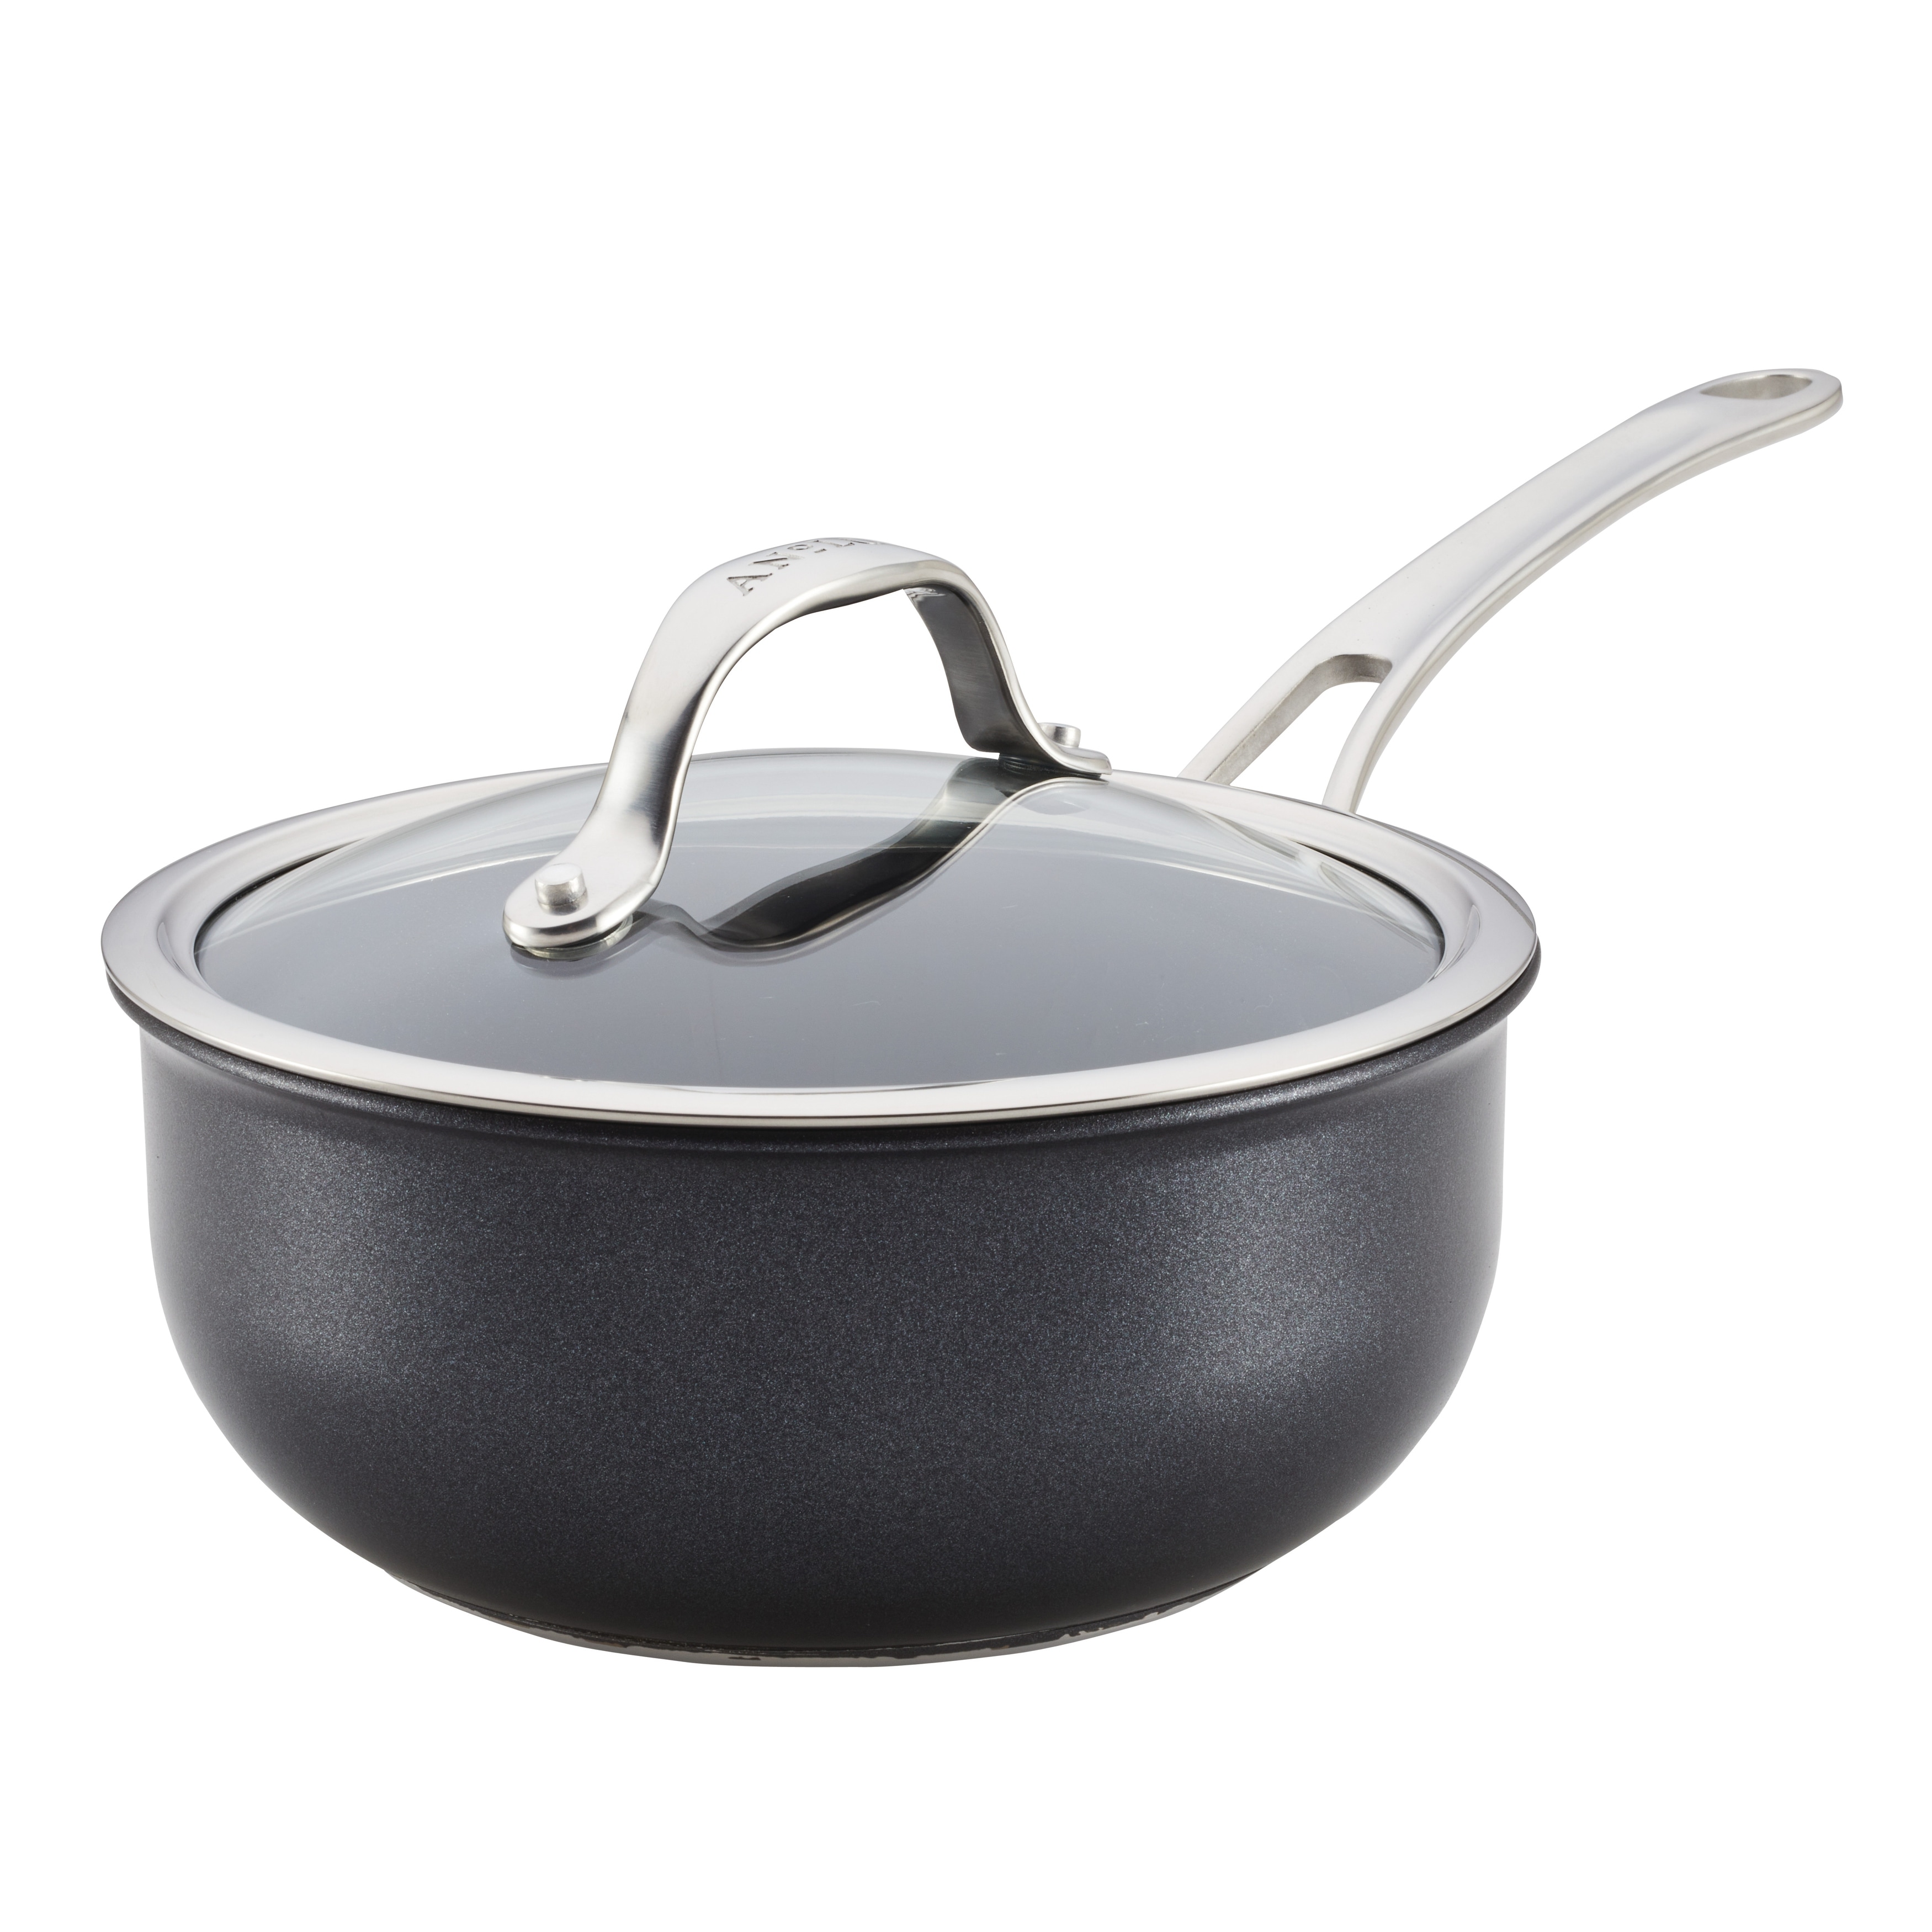 Made In Cookware - 5 Quart Stainless Steel Saucier Pan 